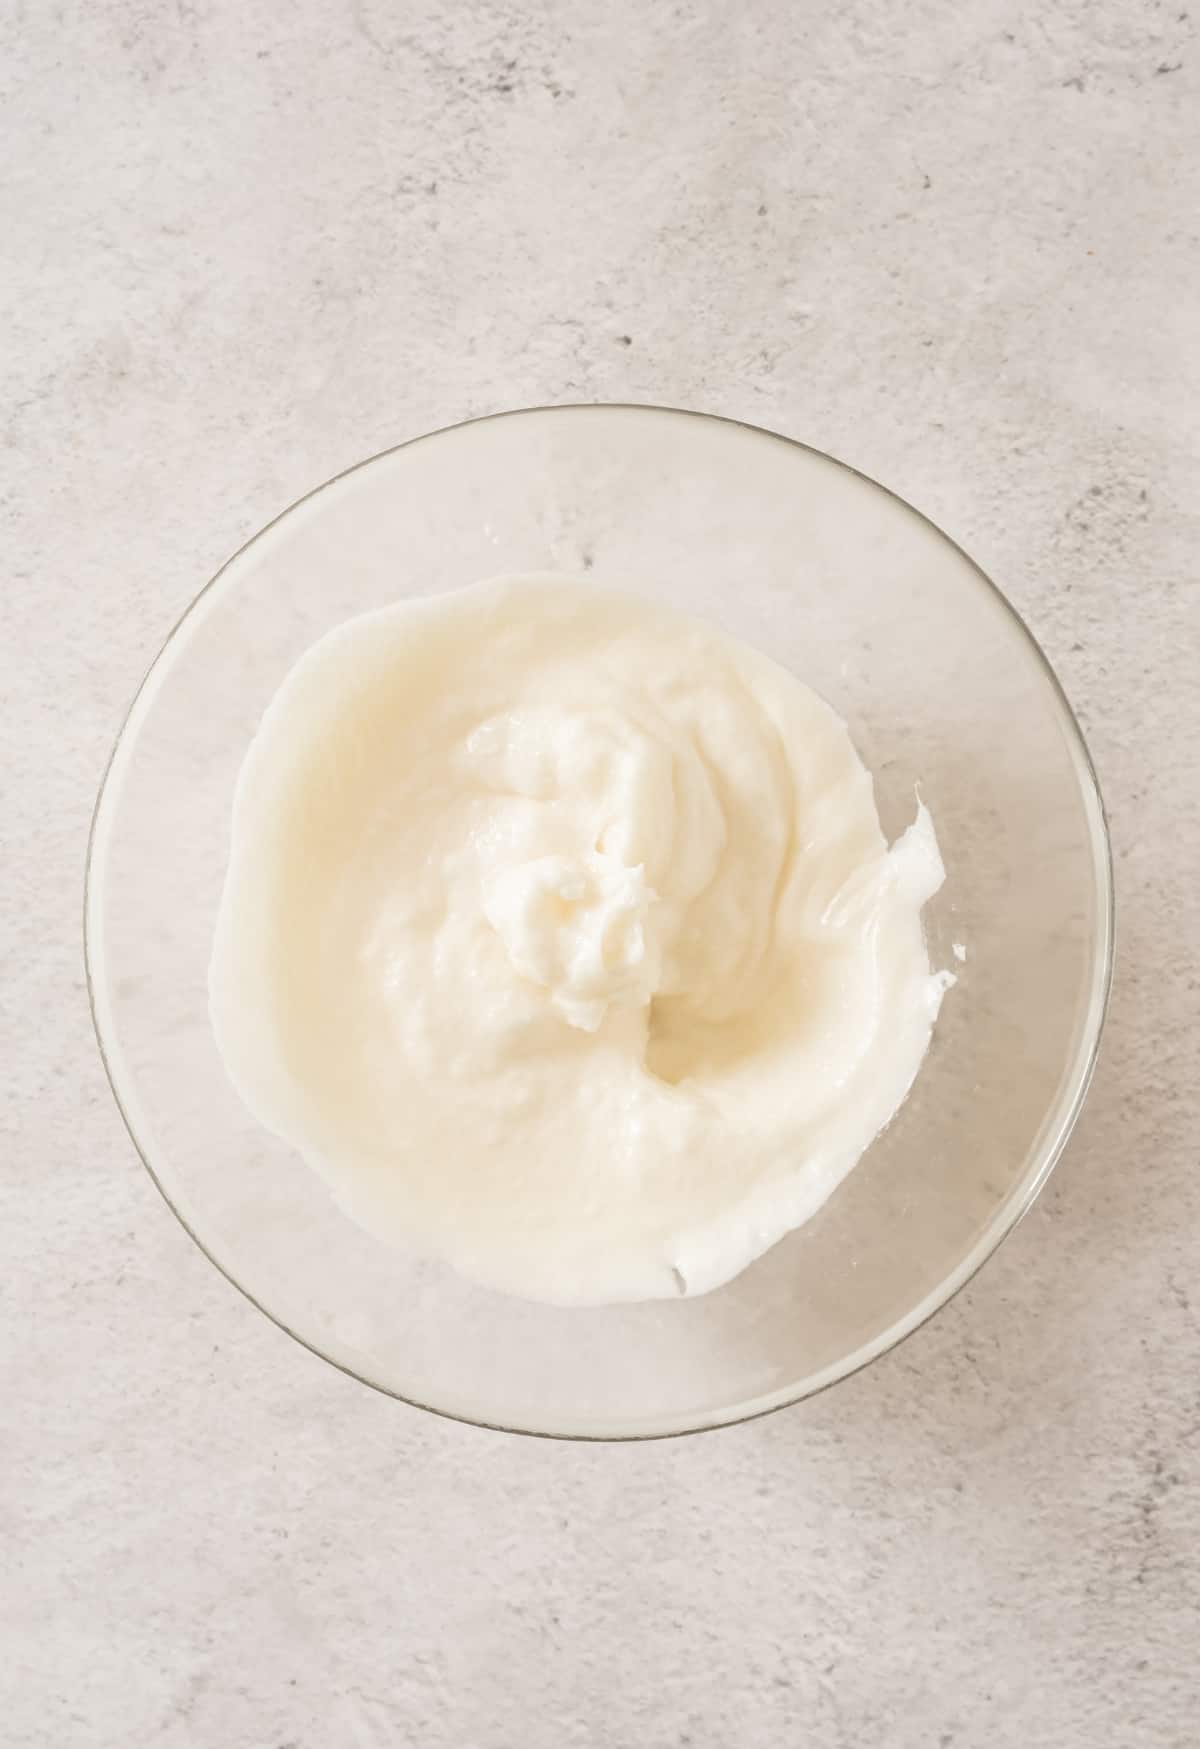 Lard creamed in a large glass bowl.